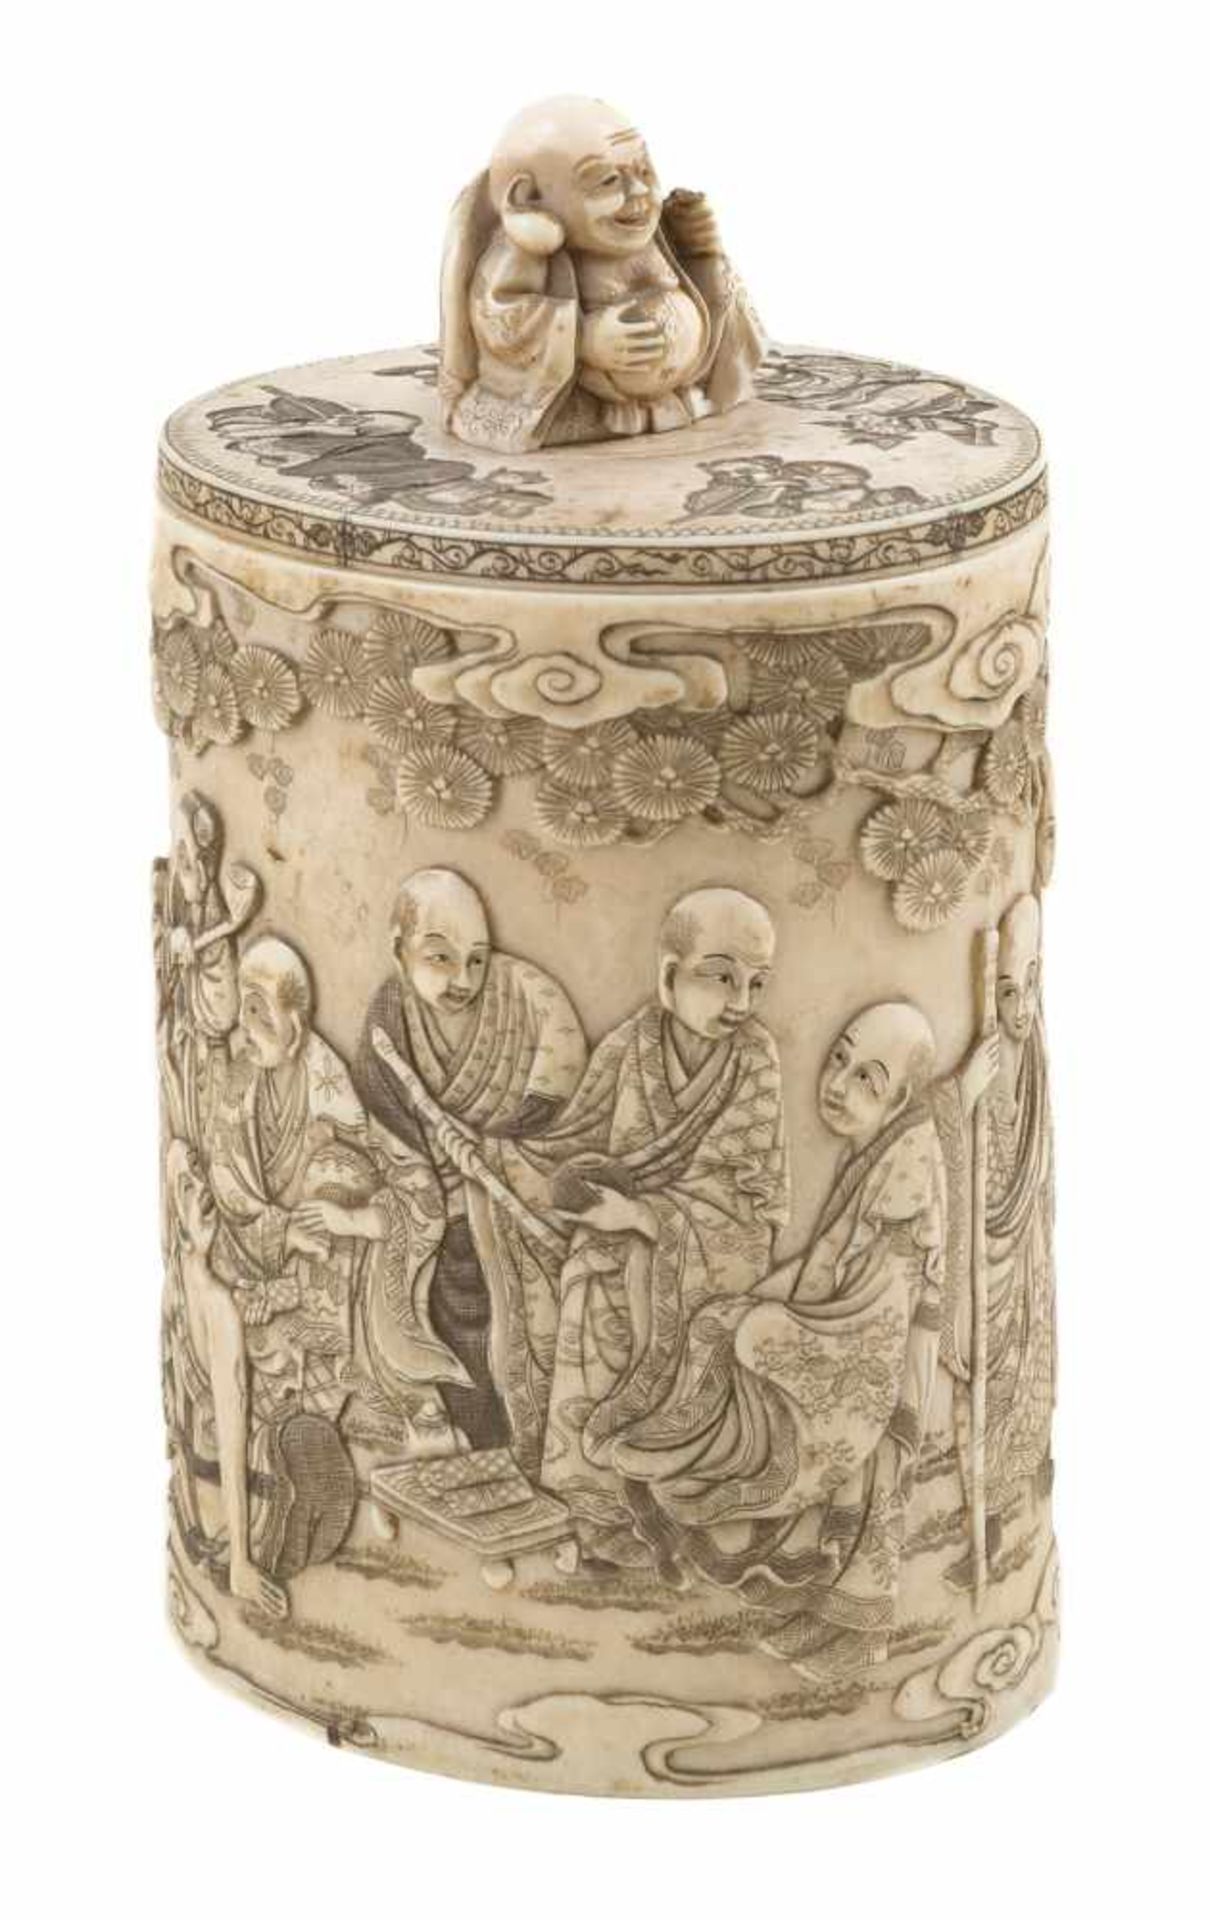 Sculpted ivory jar. Japan. Late 19th century.Decorated with Arhats under clouds and pine trees.